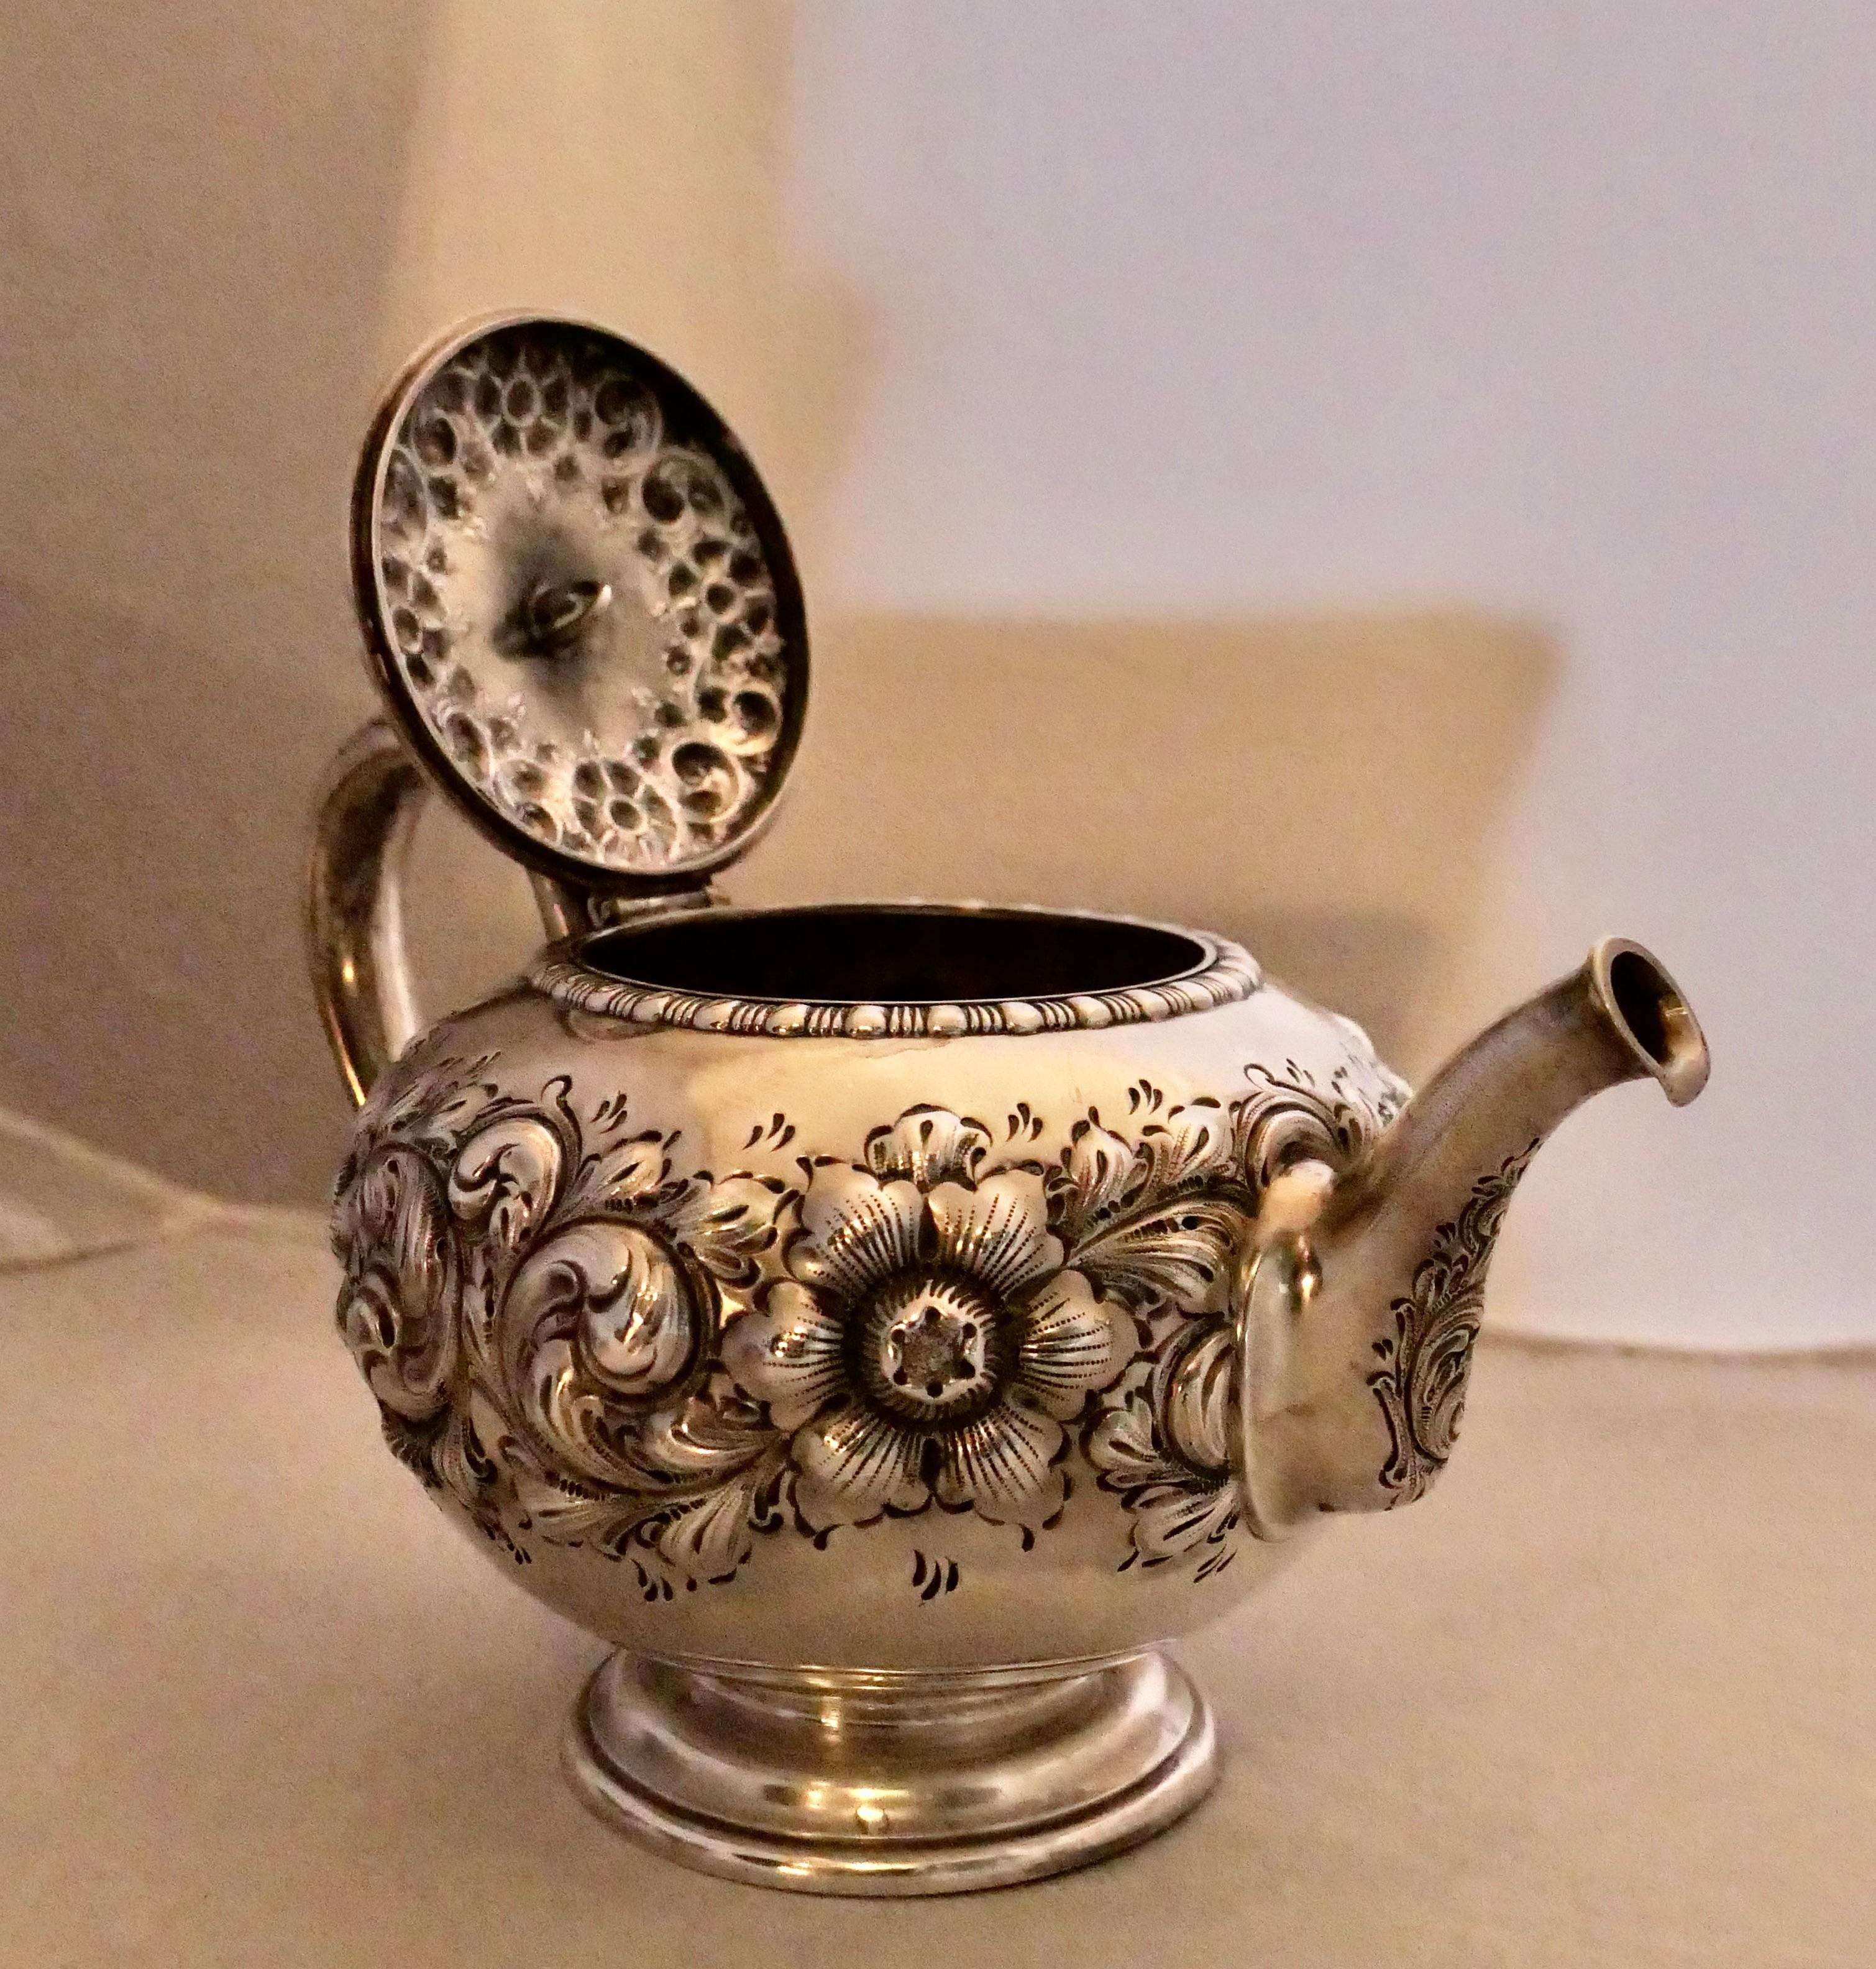 Gorham Sterling Tea Set In Good Condition For Sale In Bronx, NY